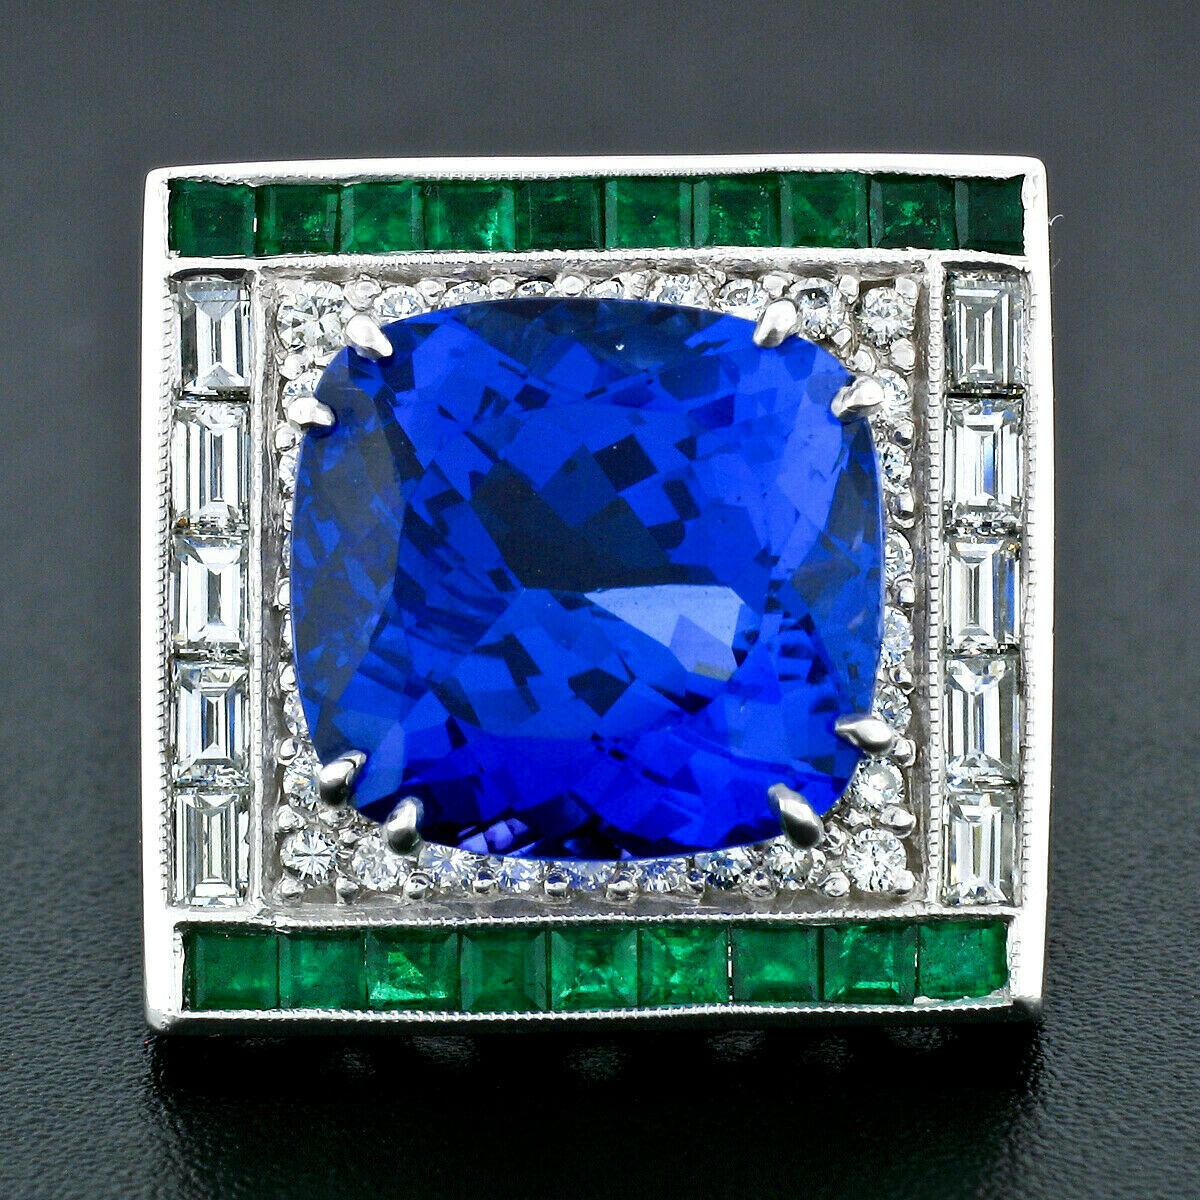 You are looking at a truly fine and breathtaking, GIA certified tanzanite, emerald and diamond cocktail statement ring hand crafted in solid platinum. The ring features a very fine quality tanzanite solitaire with an outstandingly rich royal